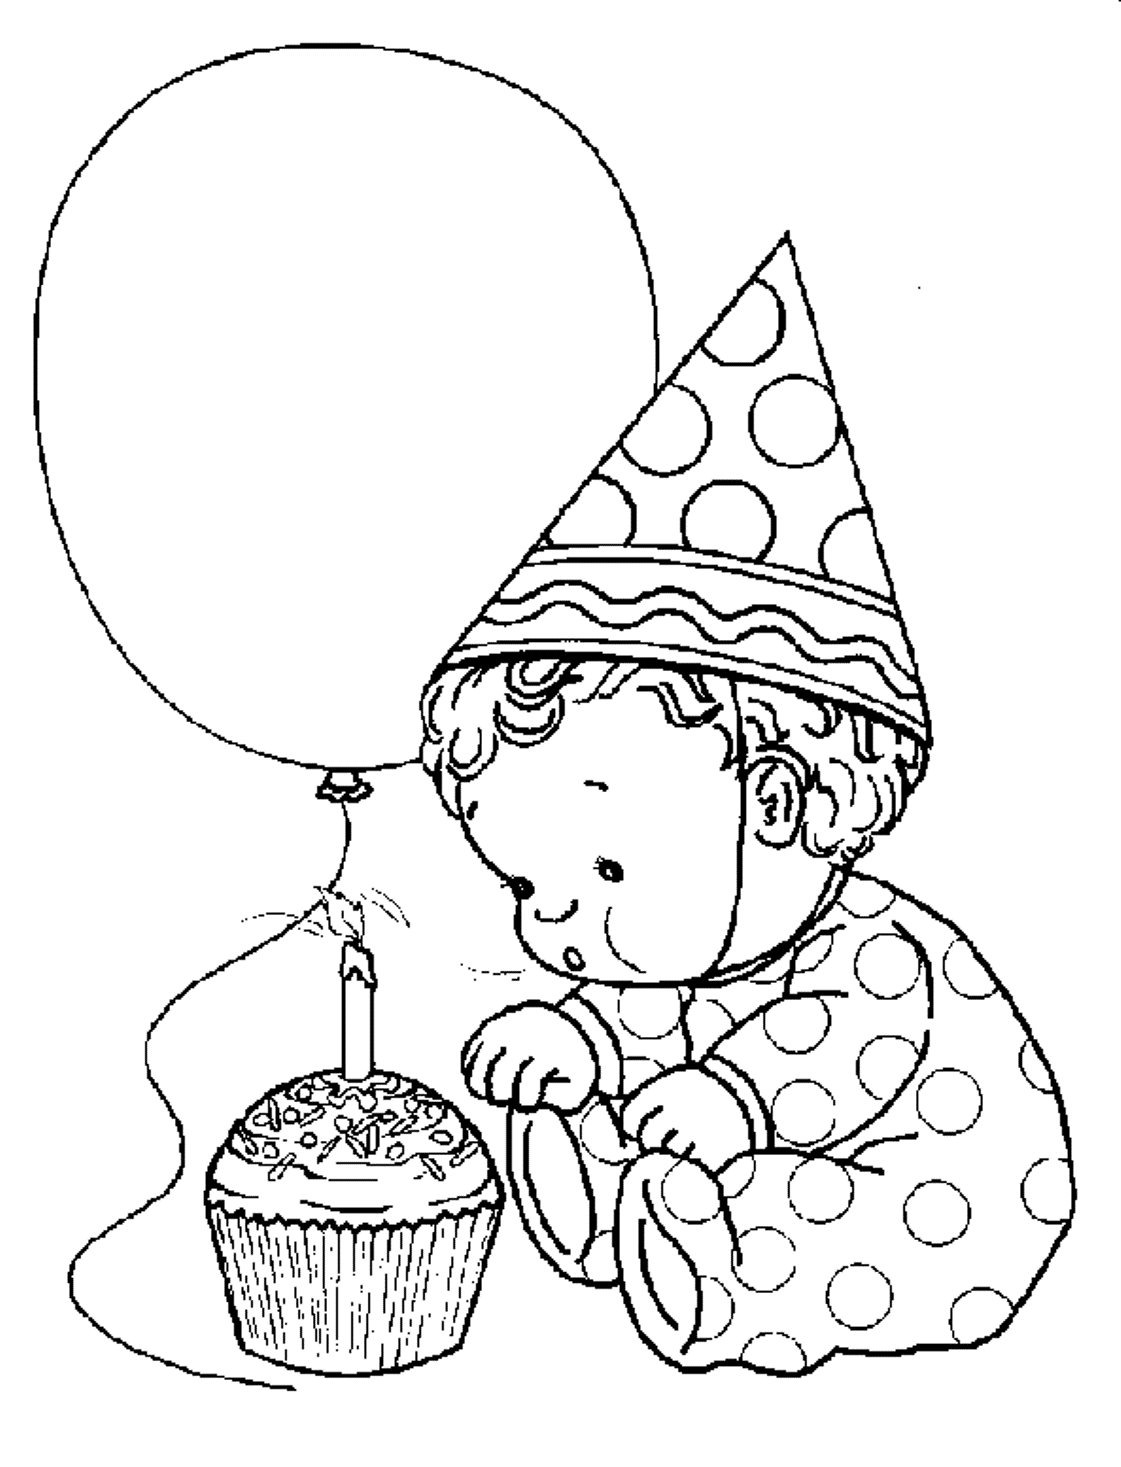 Toddler Free Birthday Coloring Pages | Birthday Coloring pages of ...